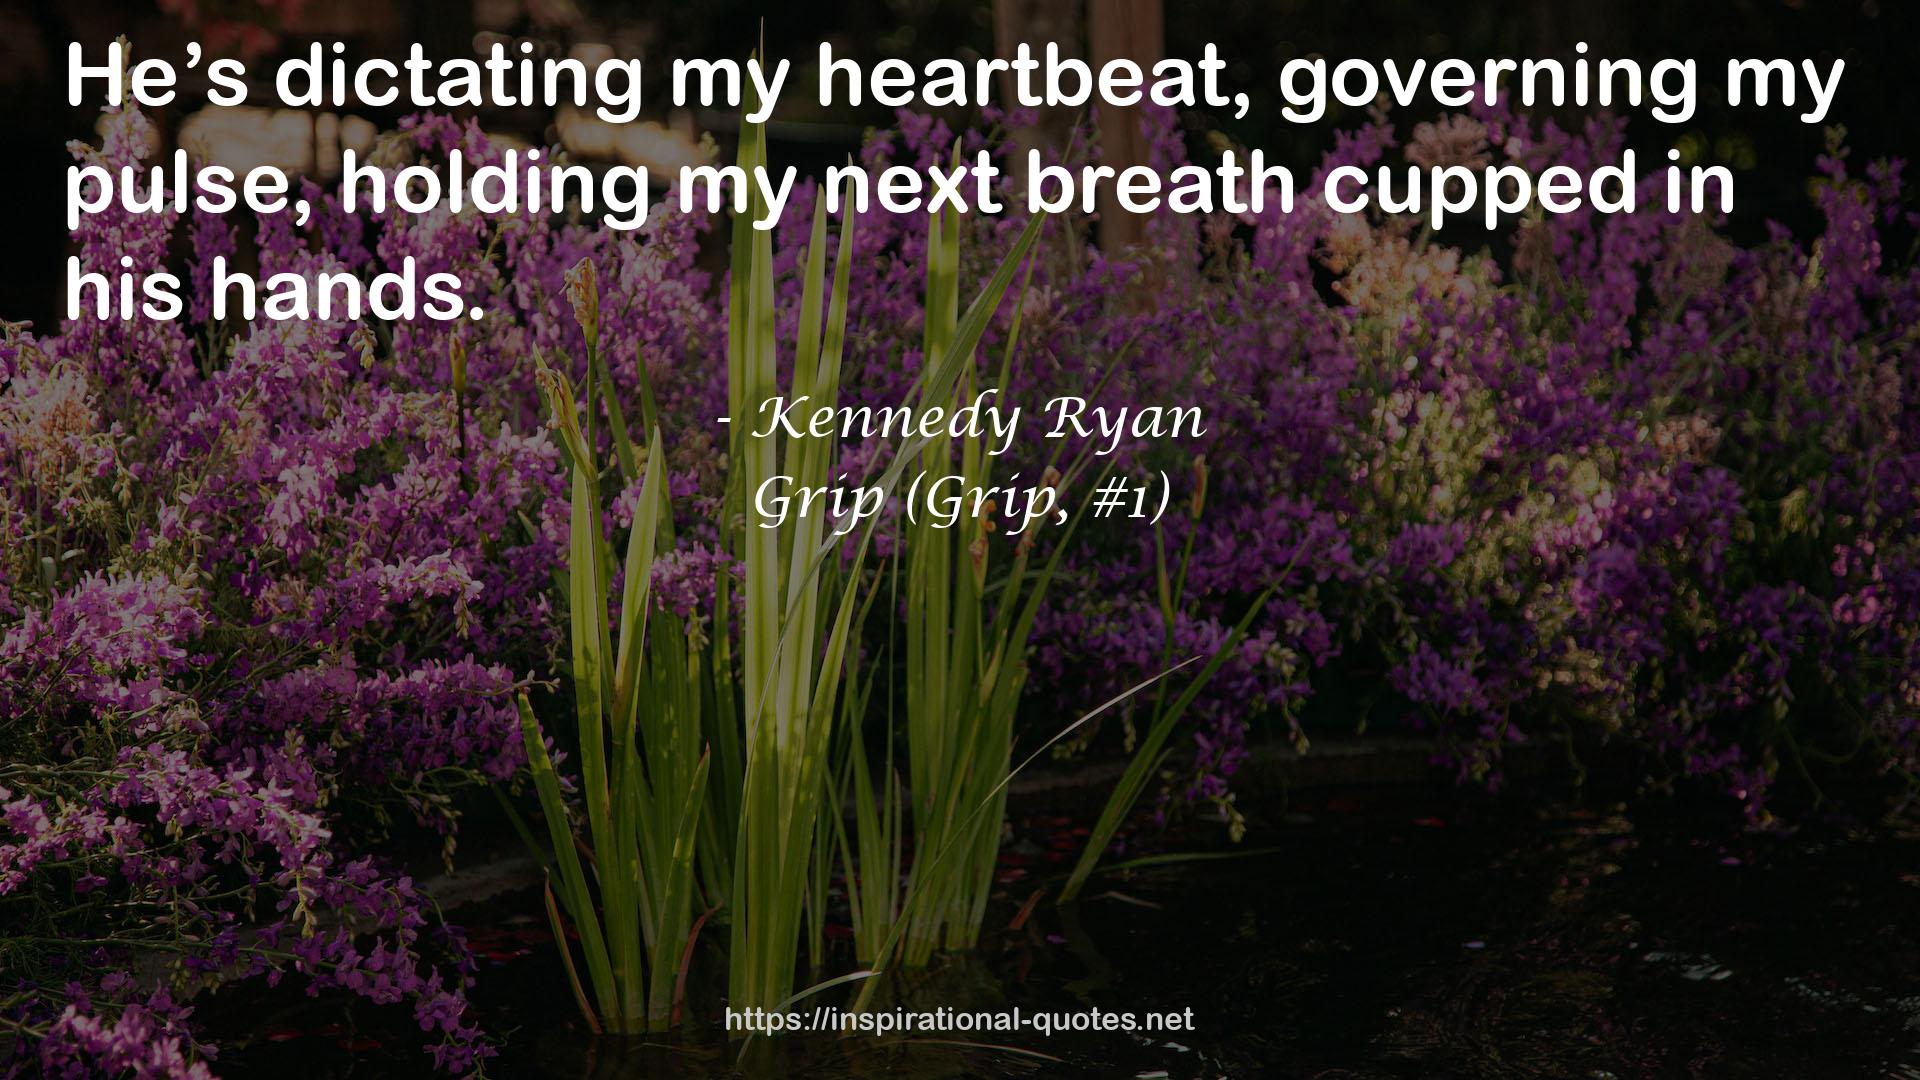 Kennedy Ryan QUOTES